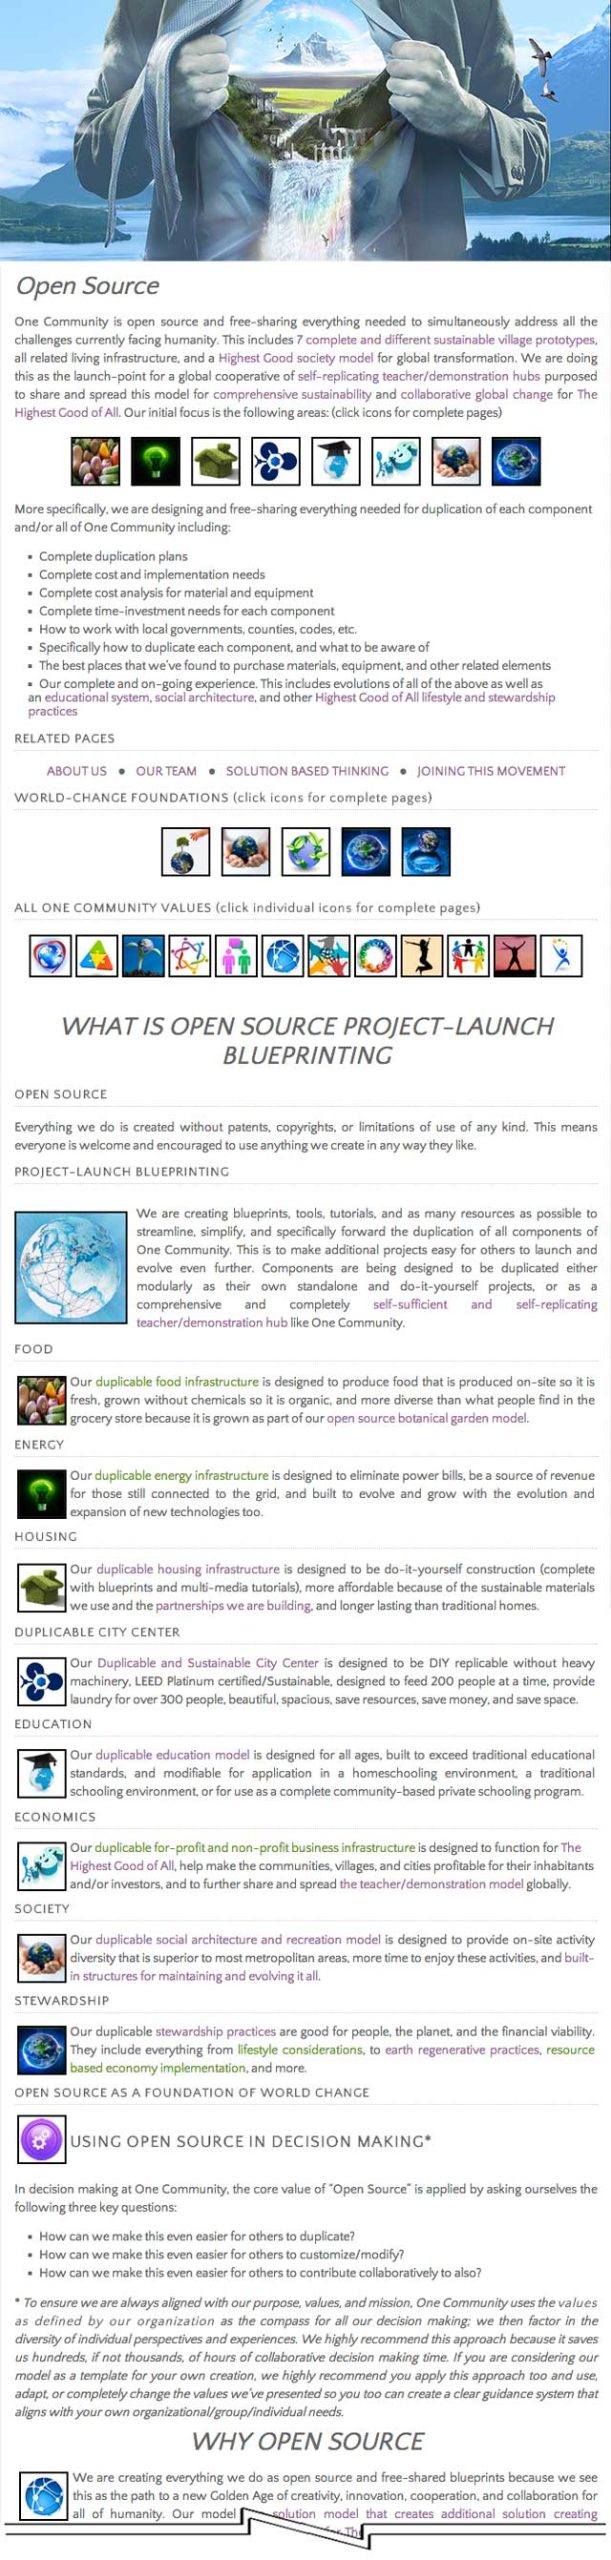 Core Value of Open Source Page, One Community, New Living Paradigm Creation